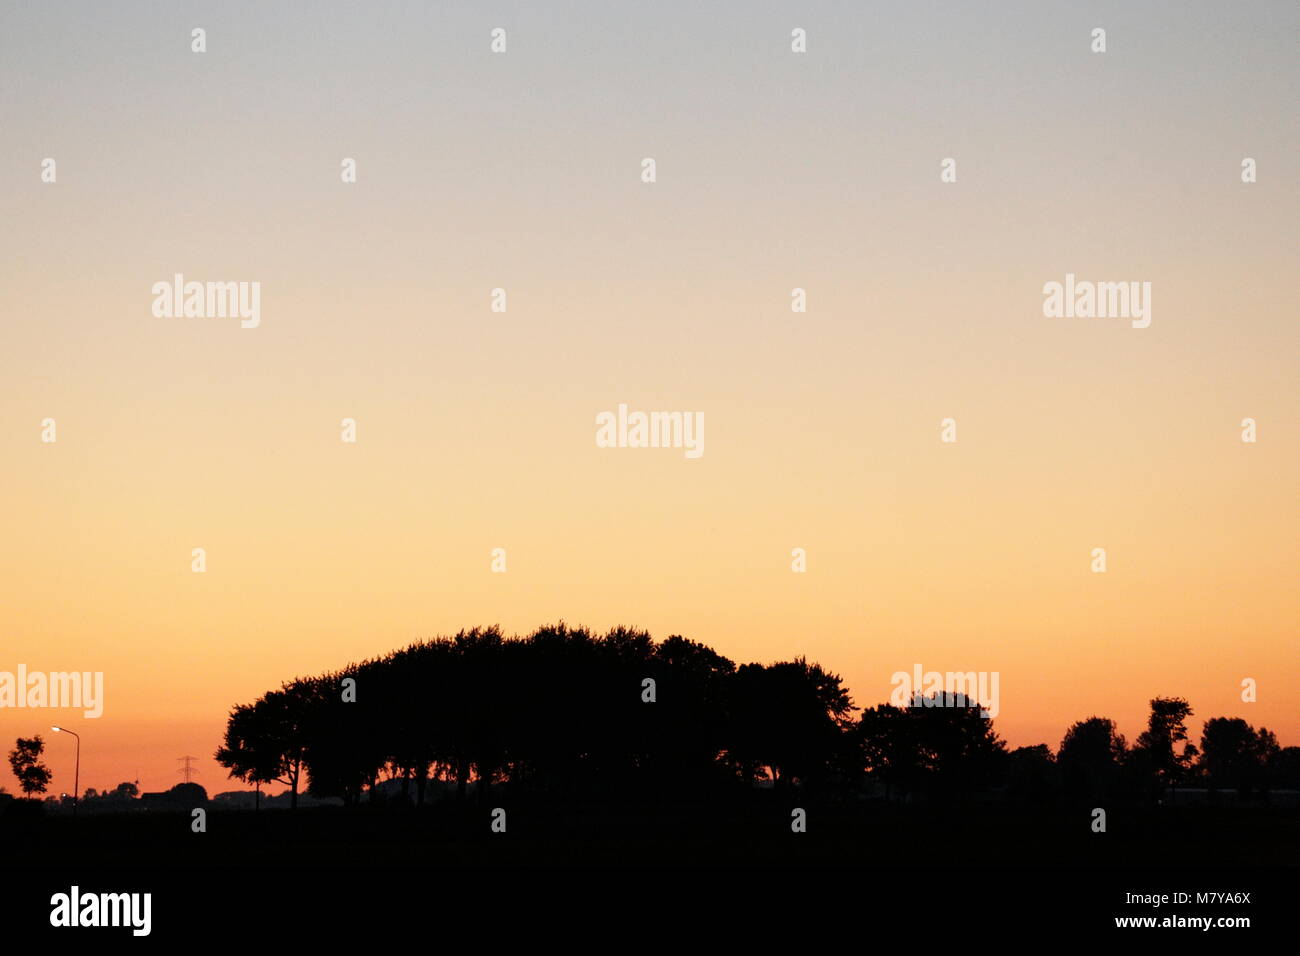 Colorful sunsets with or without silhouette Stock Photo - Alamy